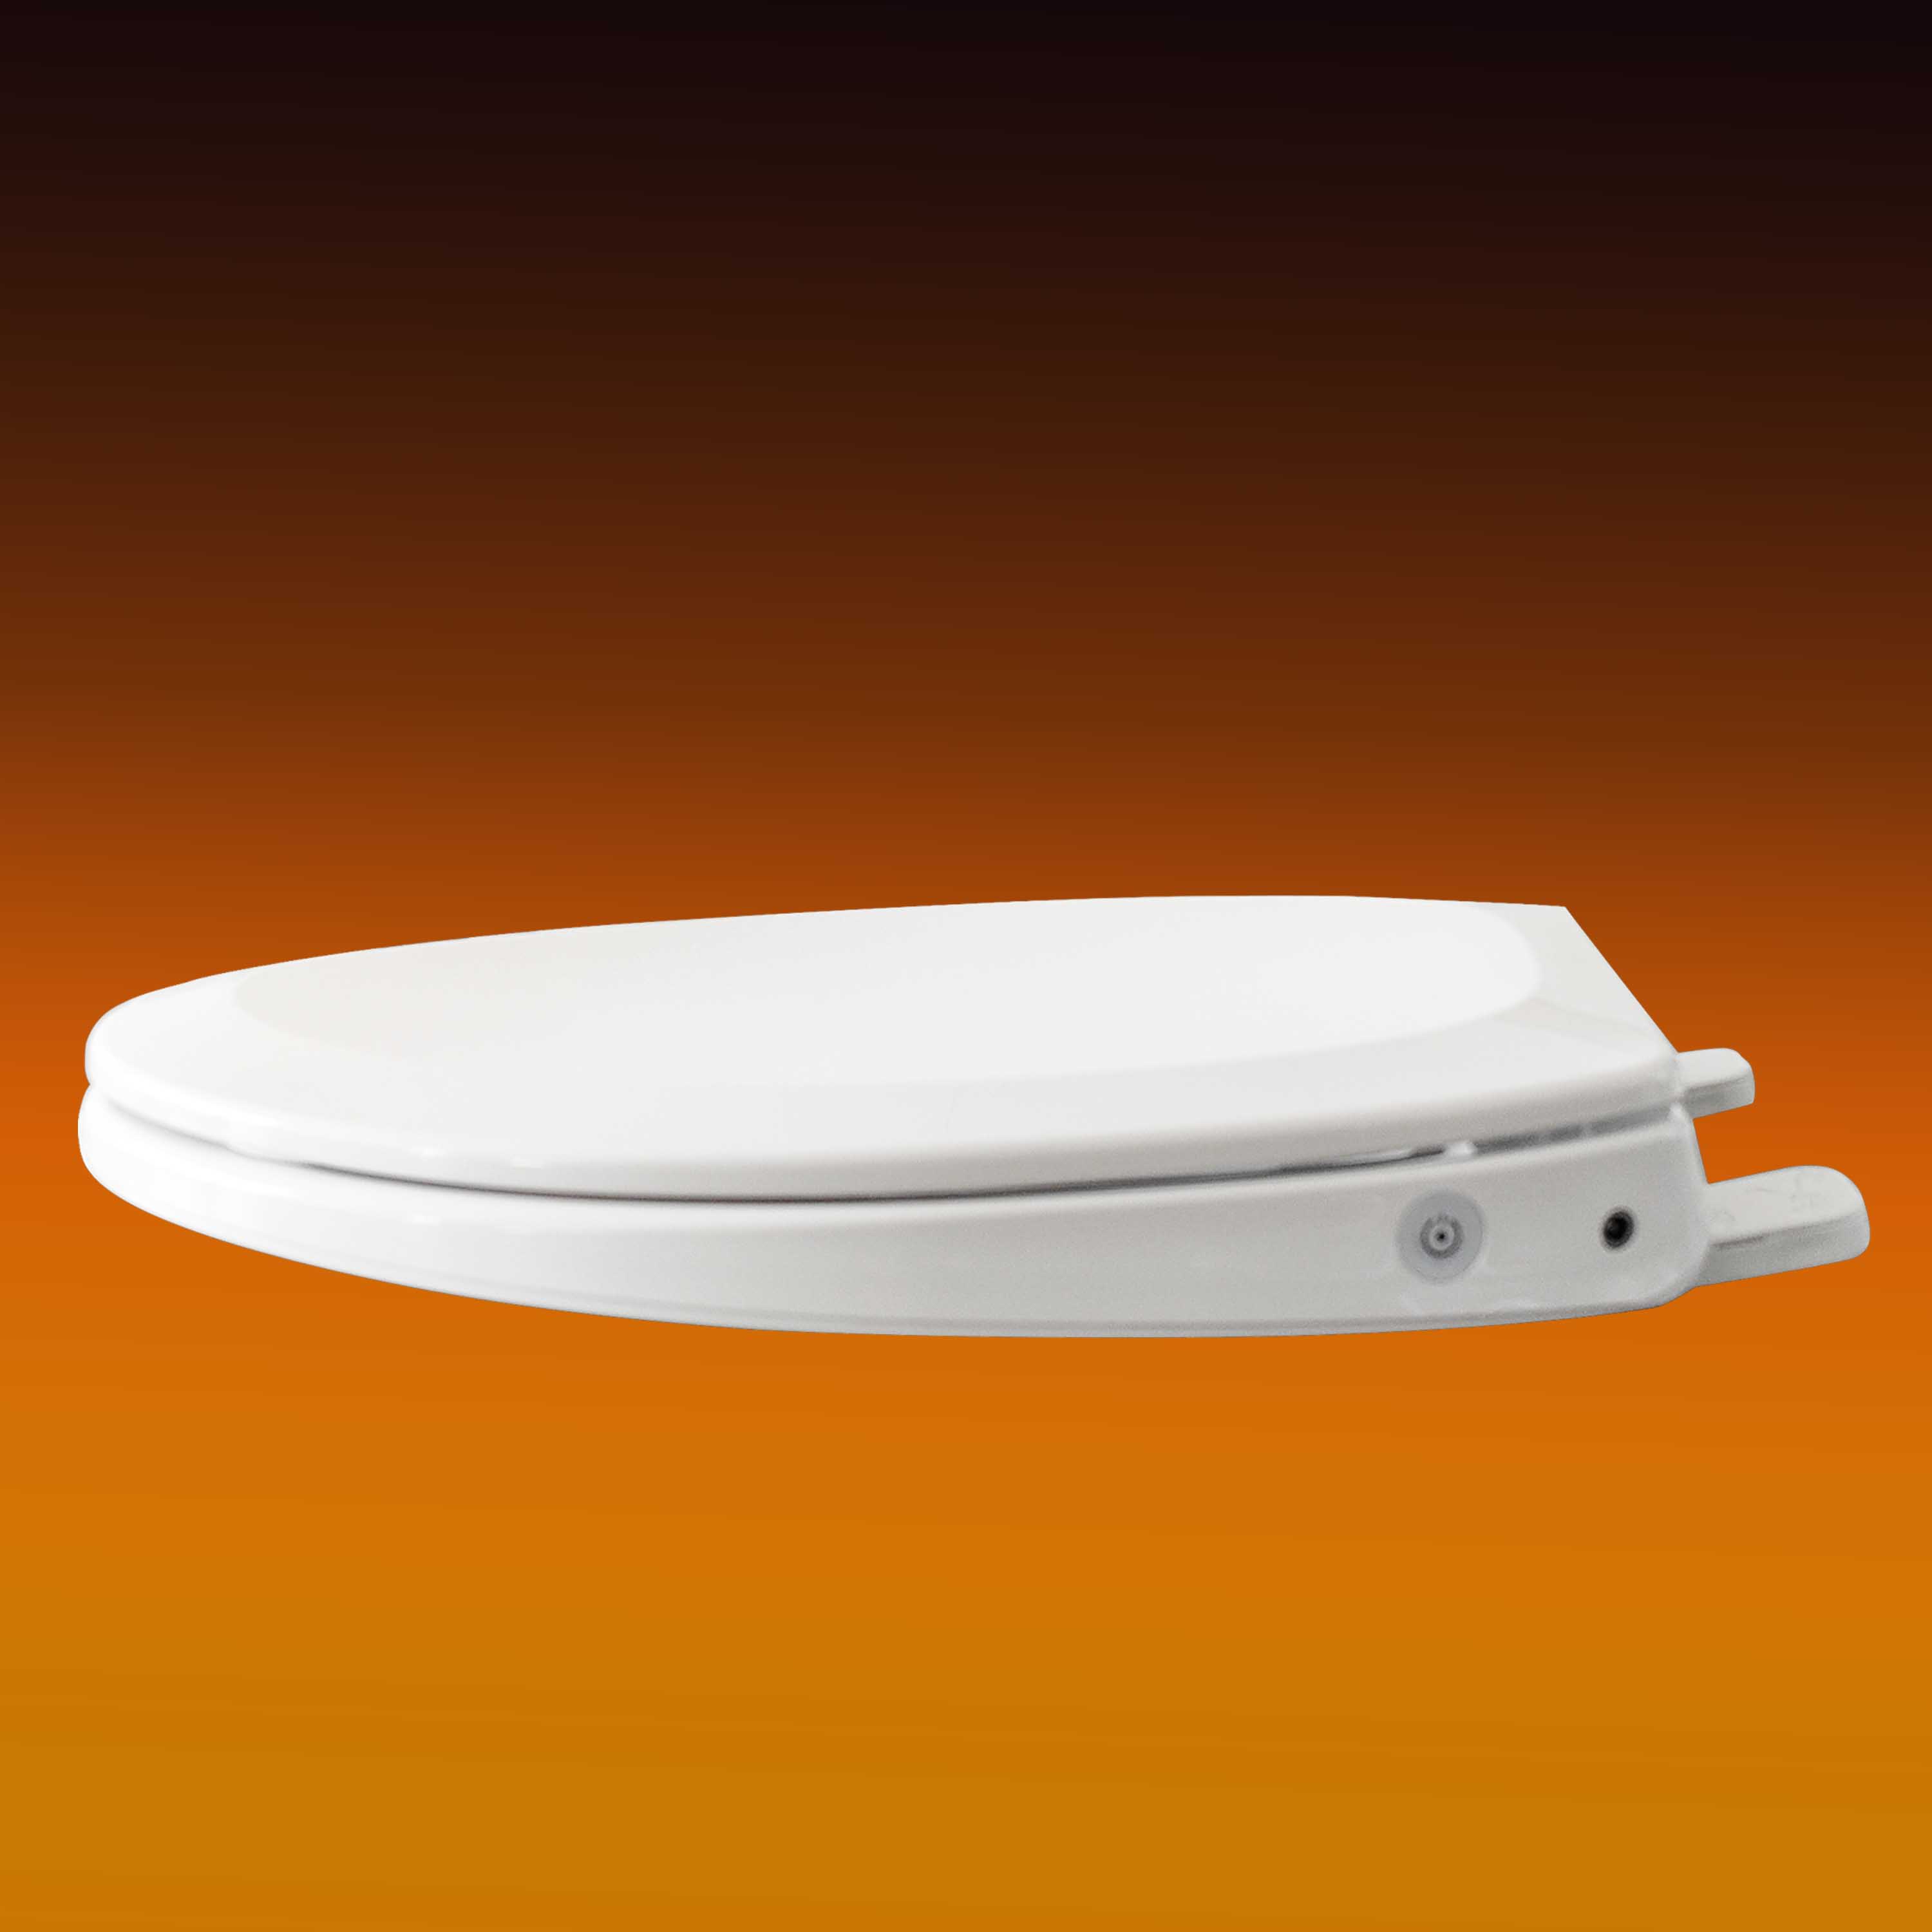 Auto Night Light Heated Toilet Seat with Built-in Side Control For Elongated V-shaped Toilets